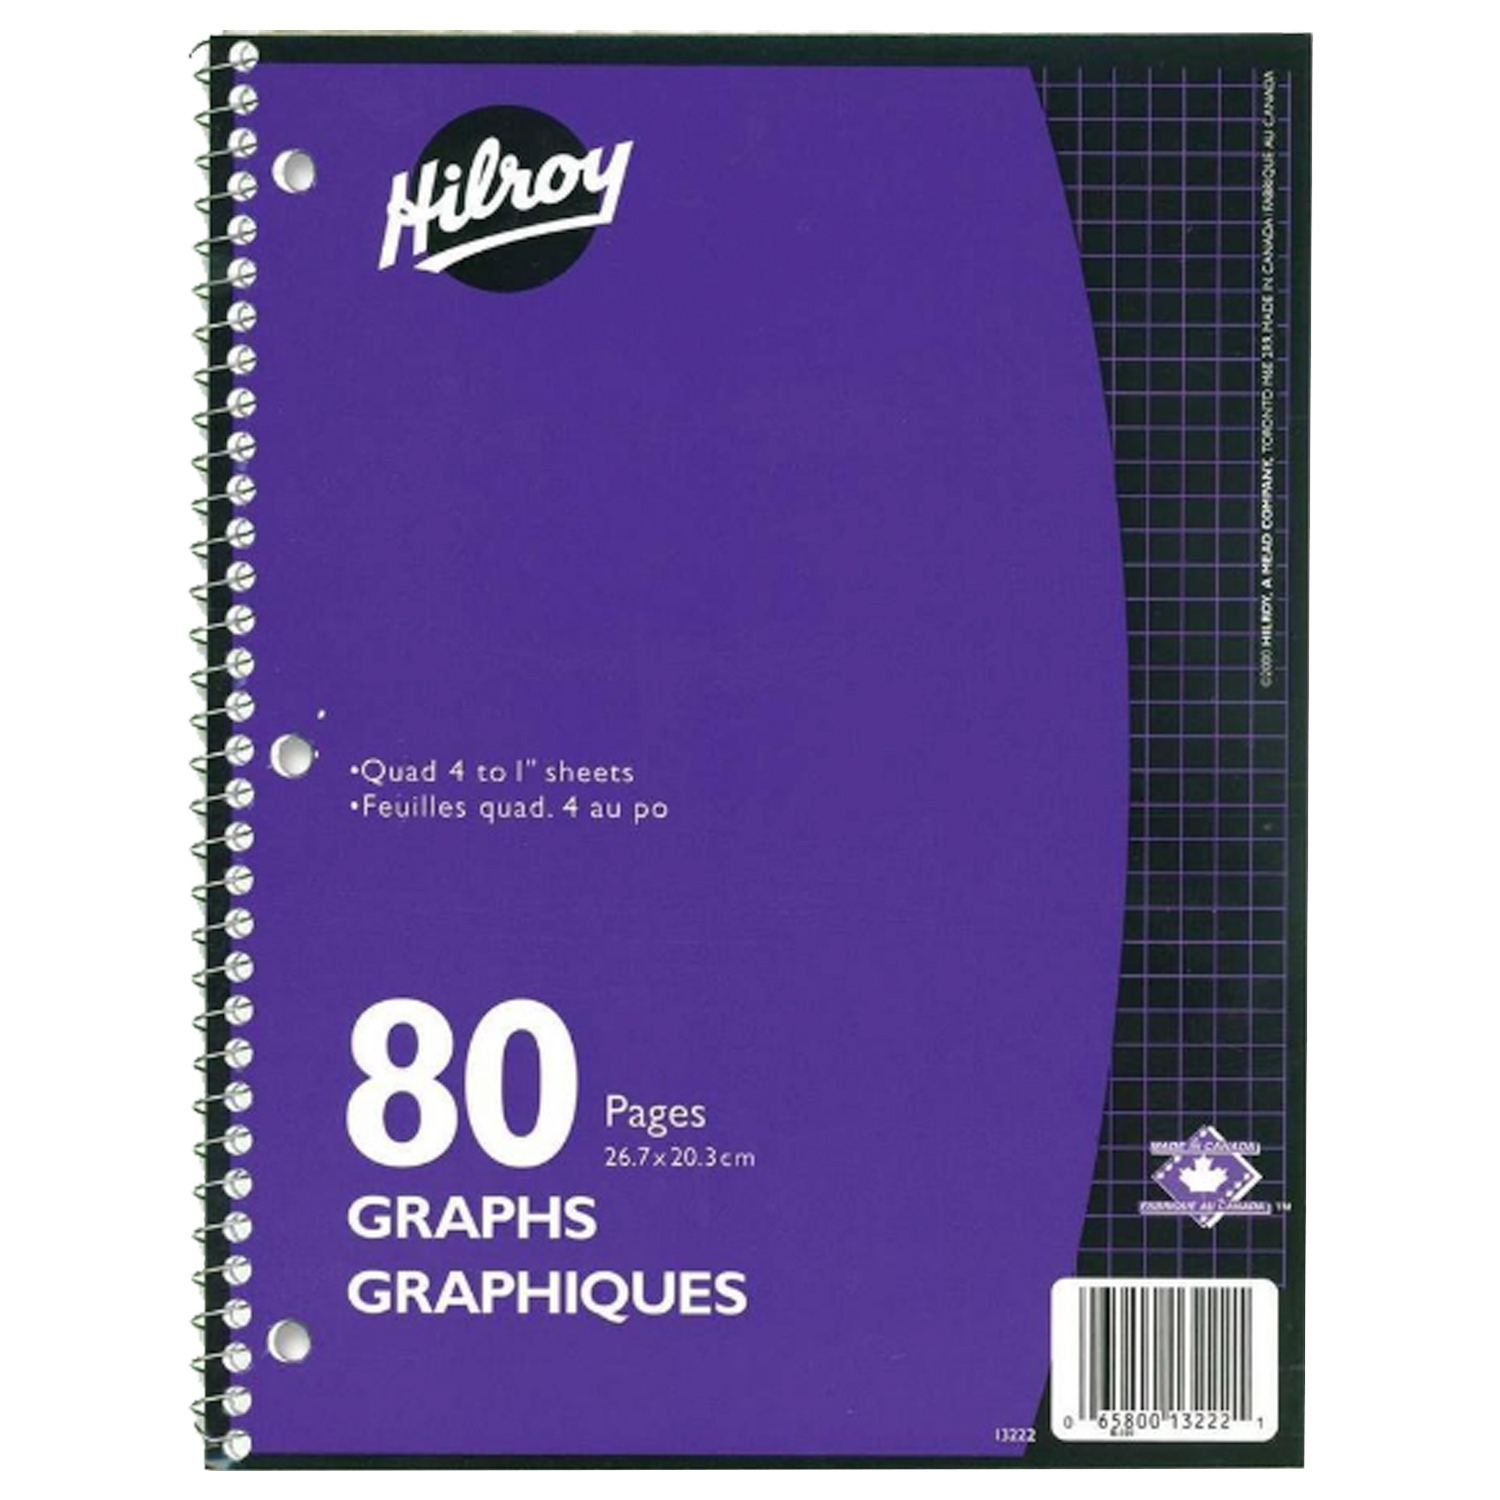 Hilroy - 1 subject graph ruled spiral notebook, 80 pages